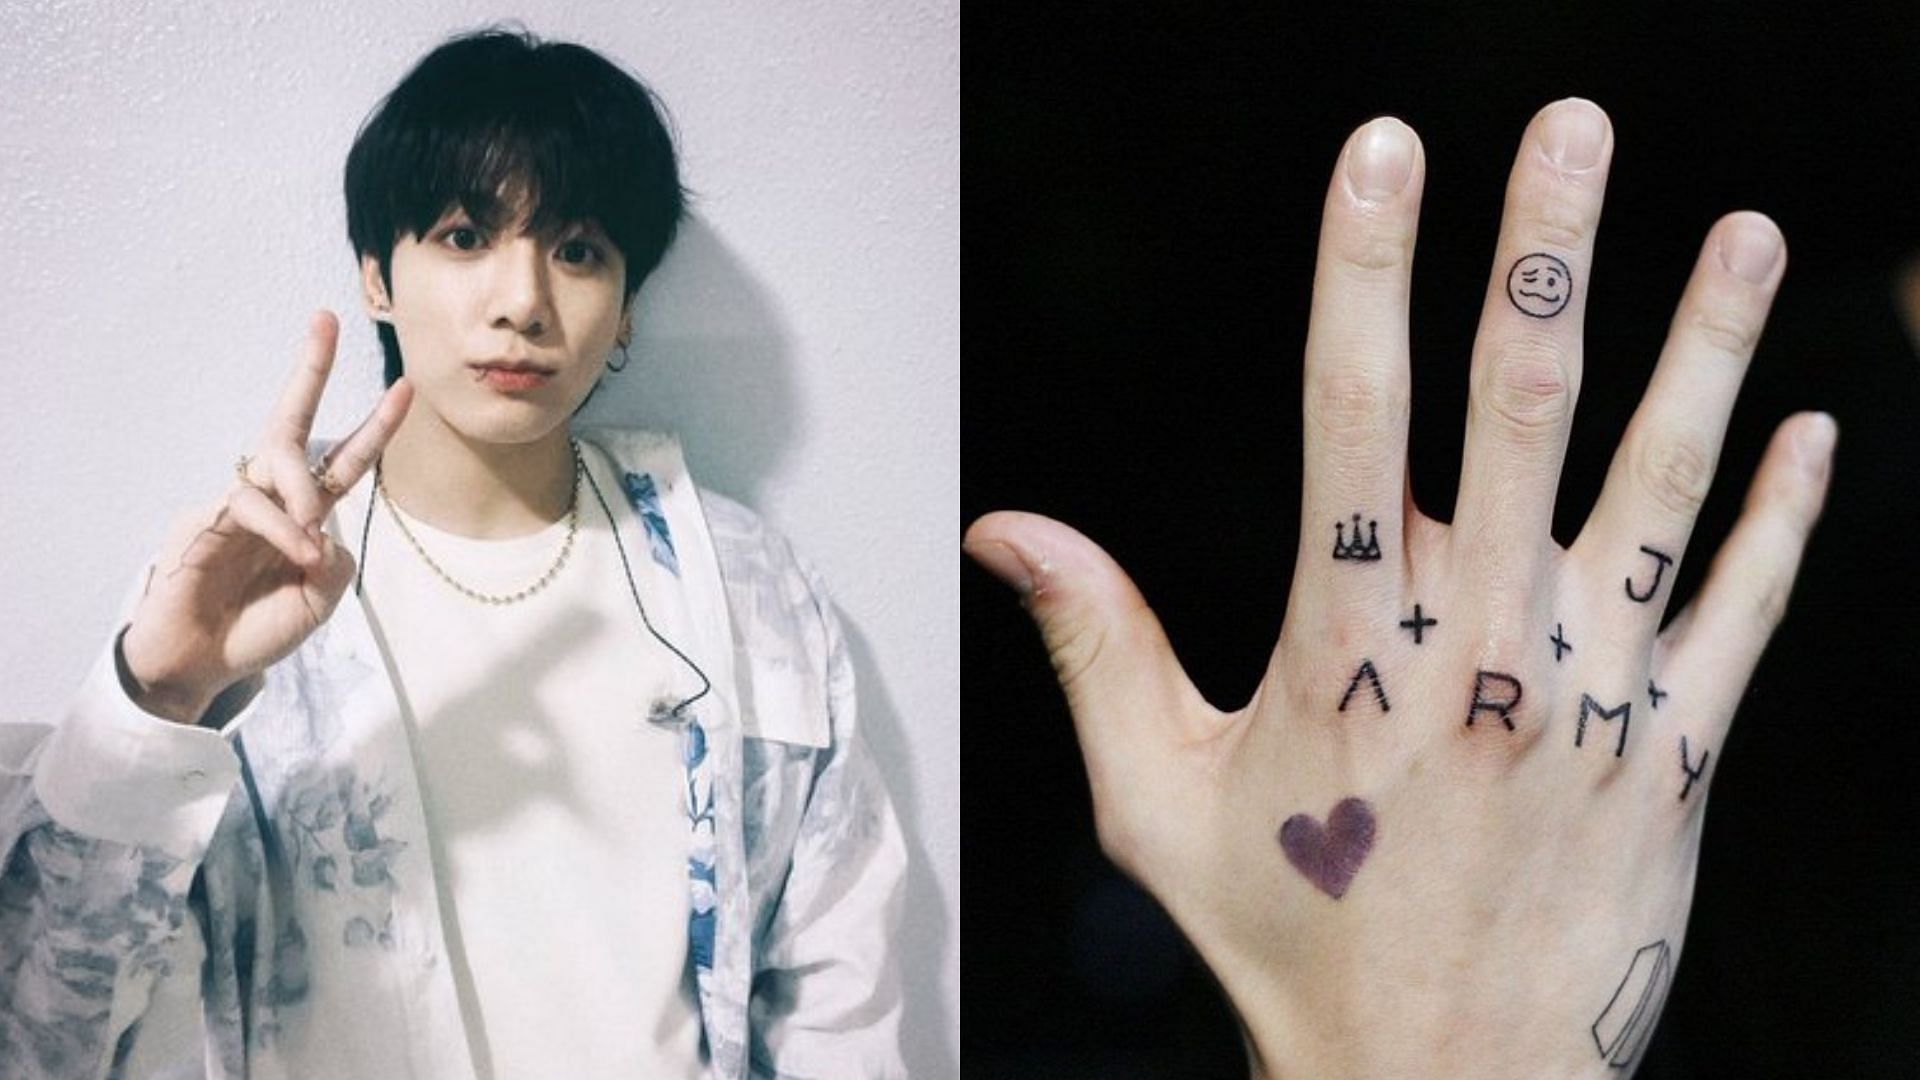 Top 9 BTS Jungkook Tattoos and Their Meanings